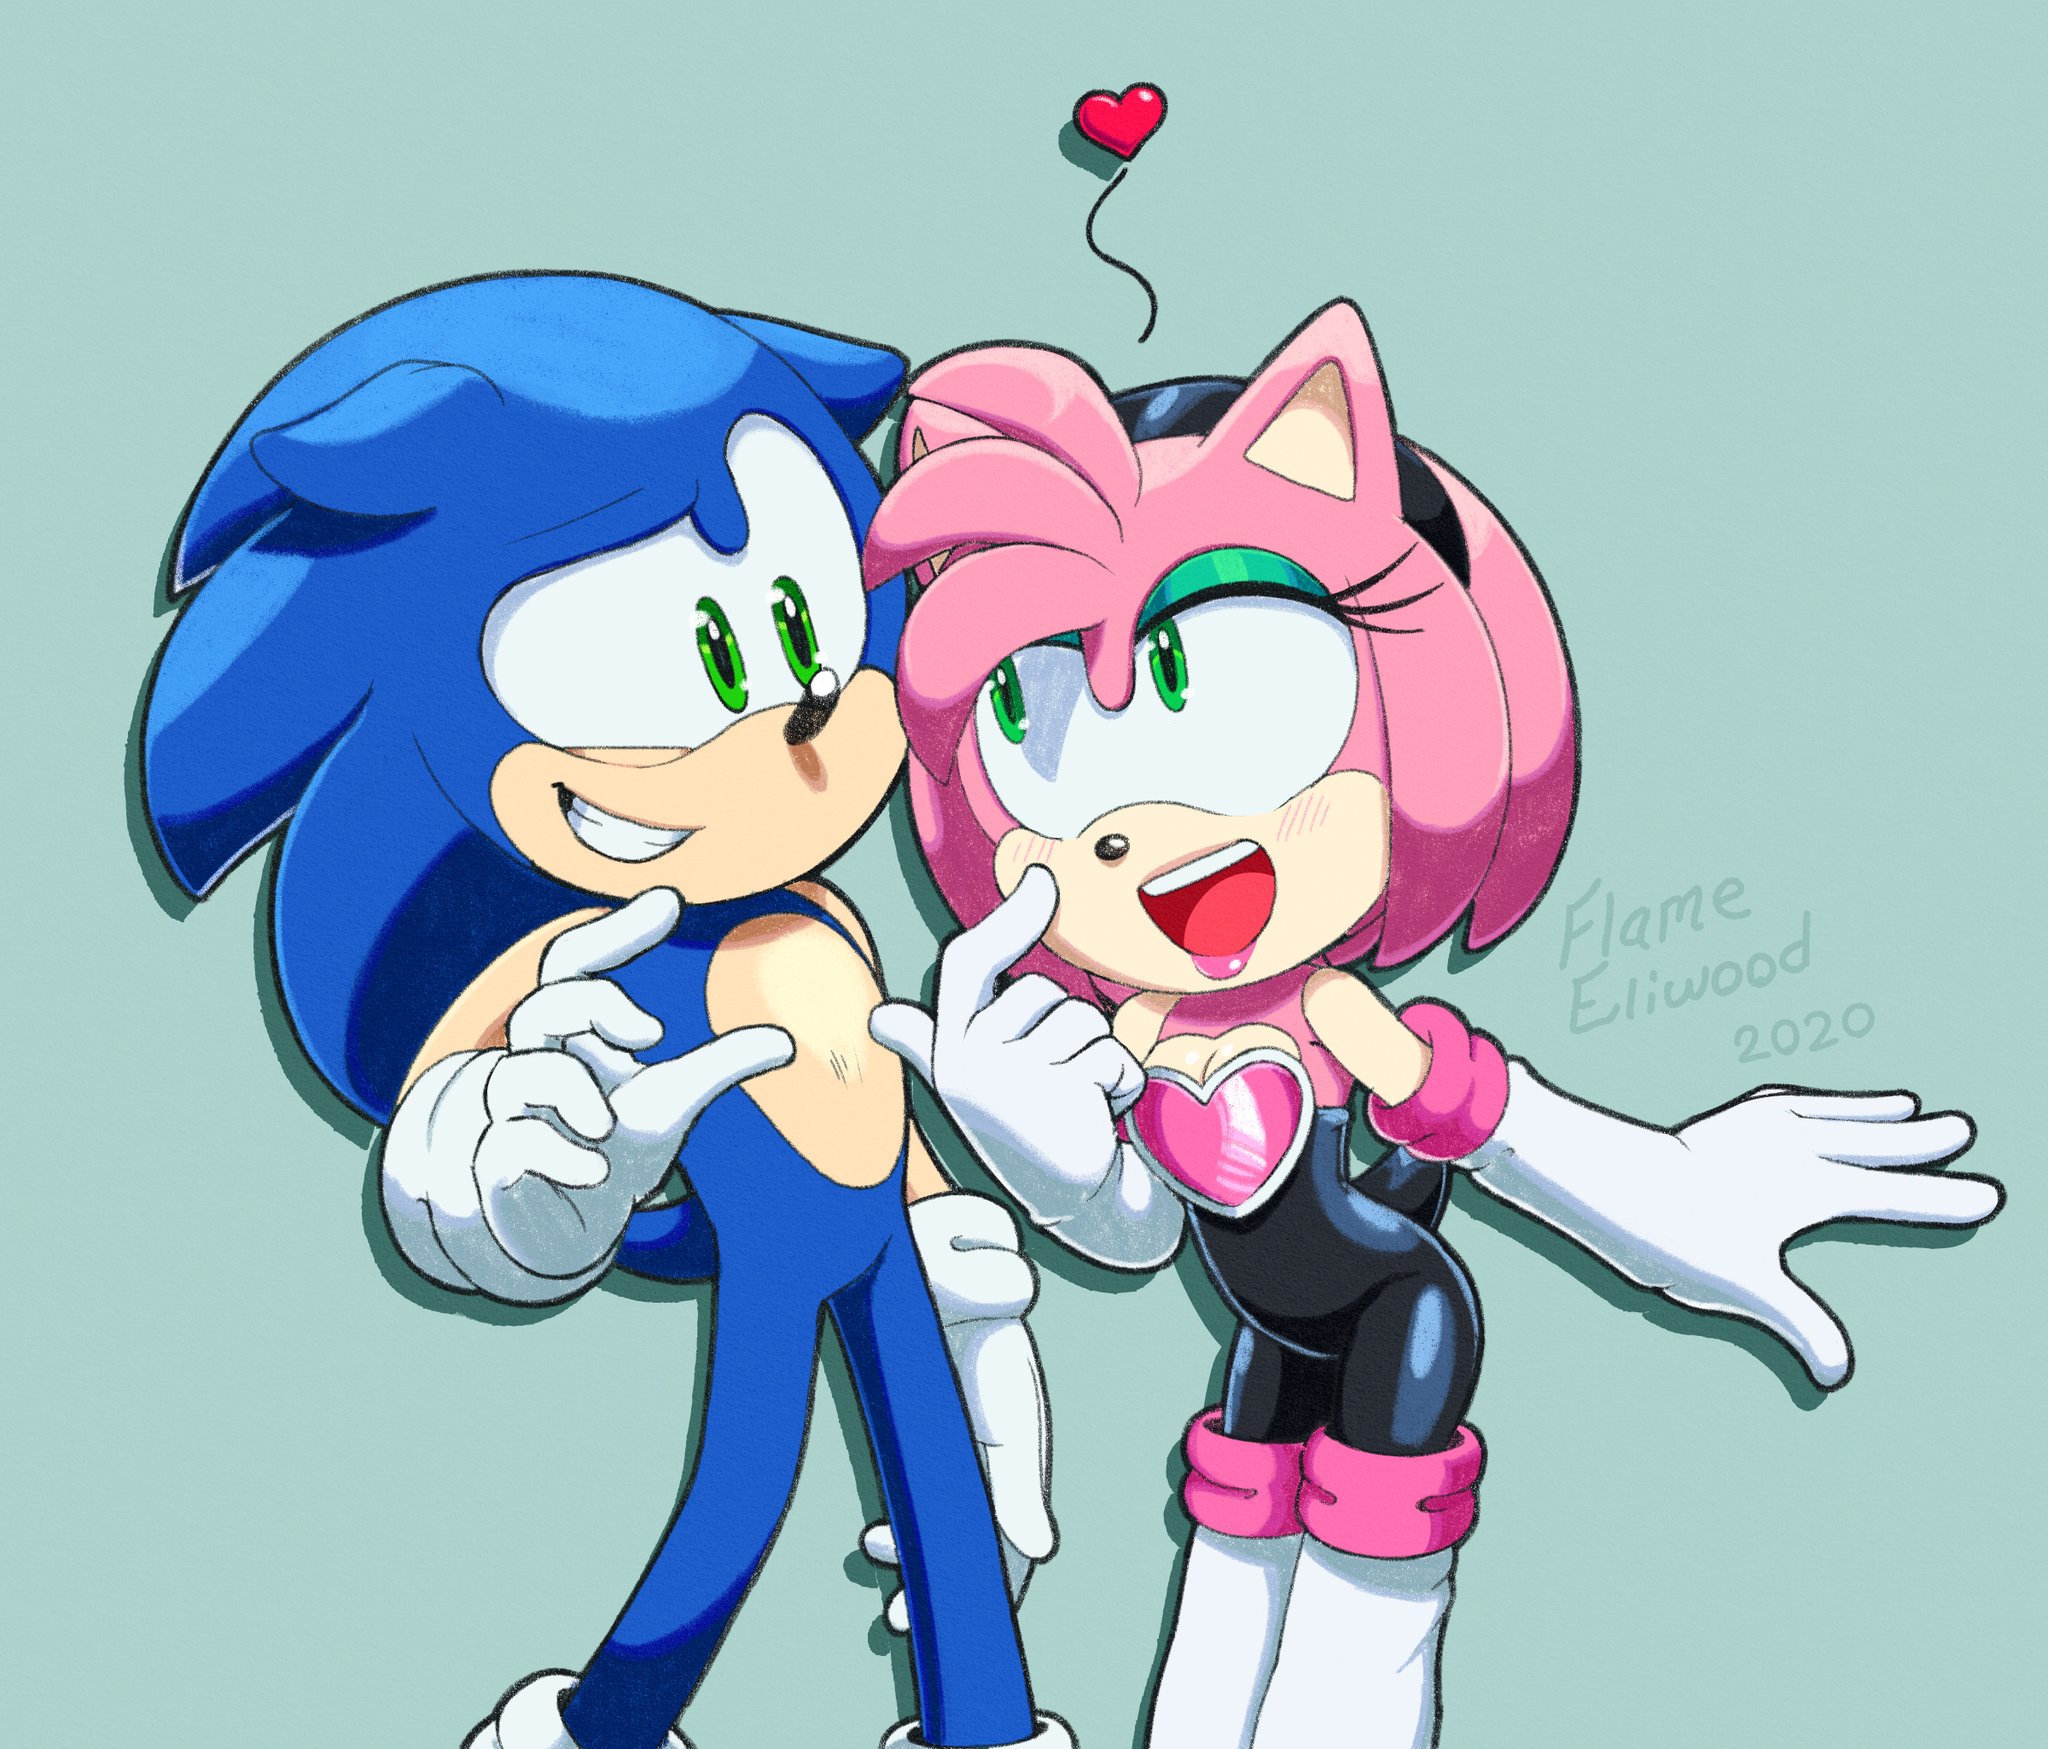 Amy Rose wearing Rouge's outfit to hopefully impress Sonic but he i...